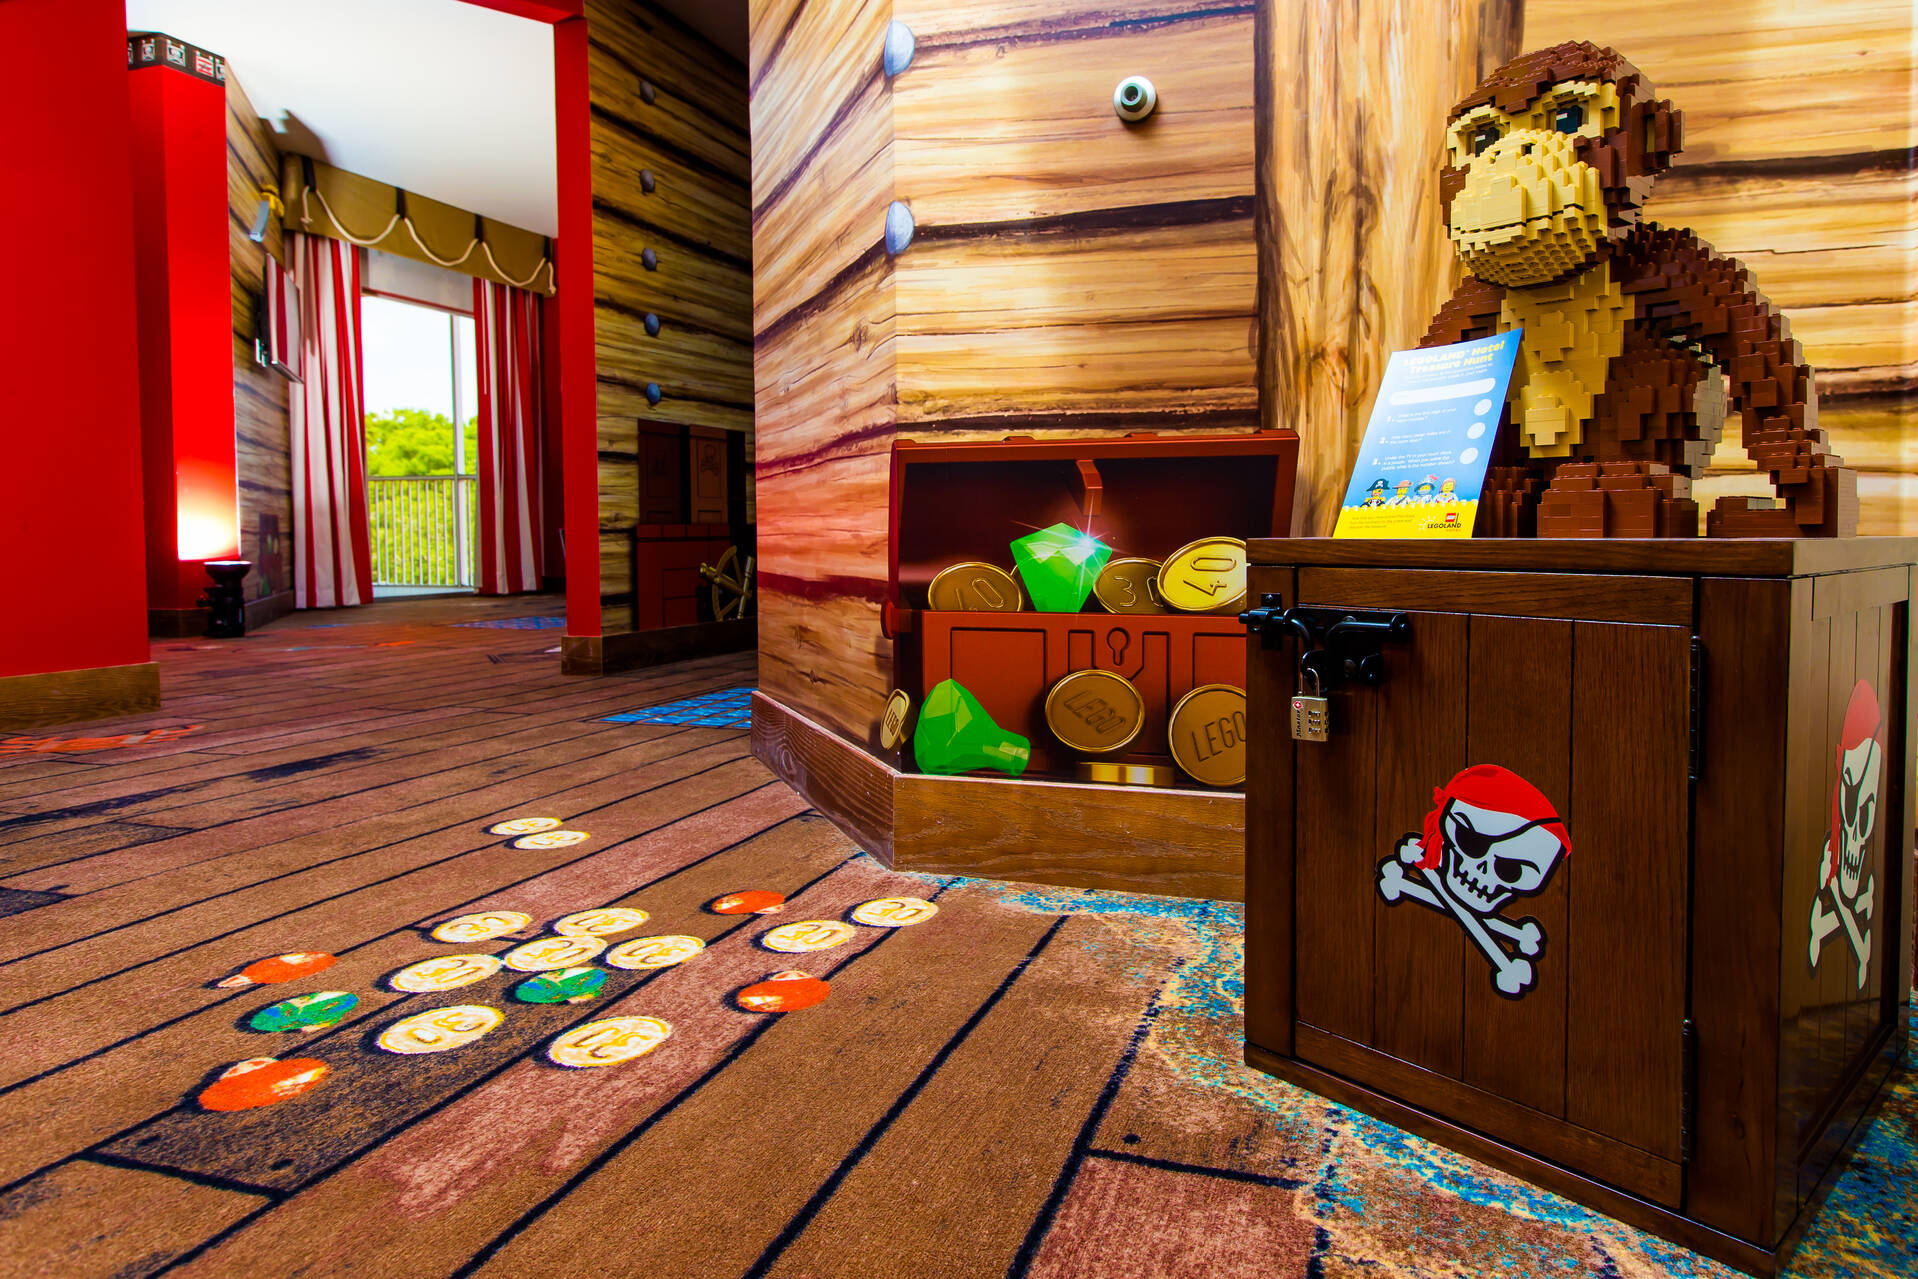 Treasure Chest in a Pirate Themed Hotel Room